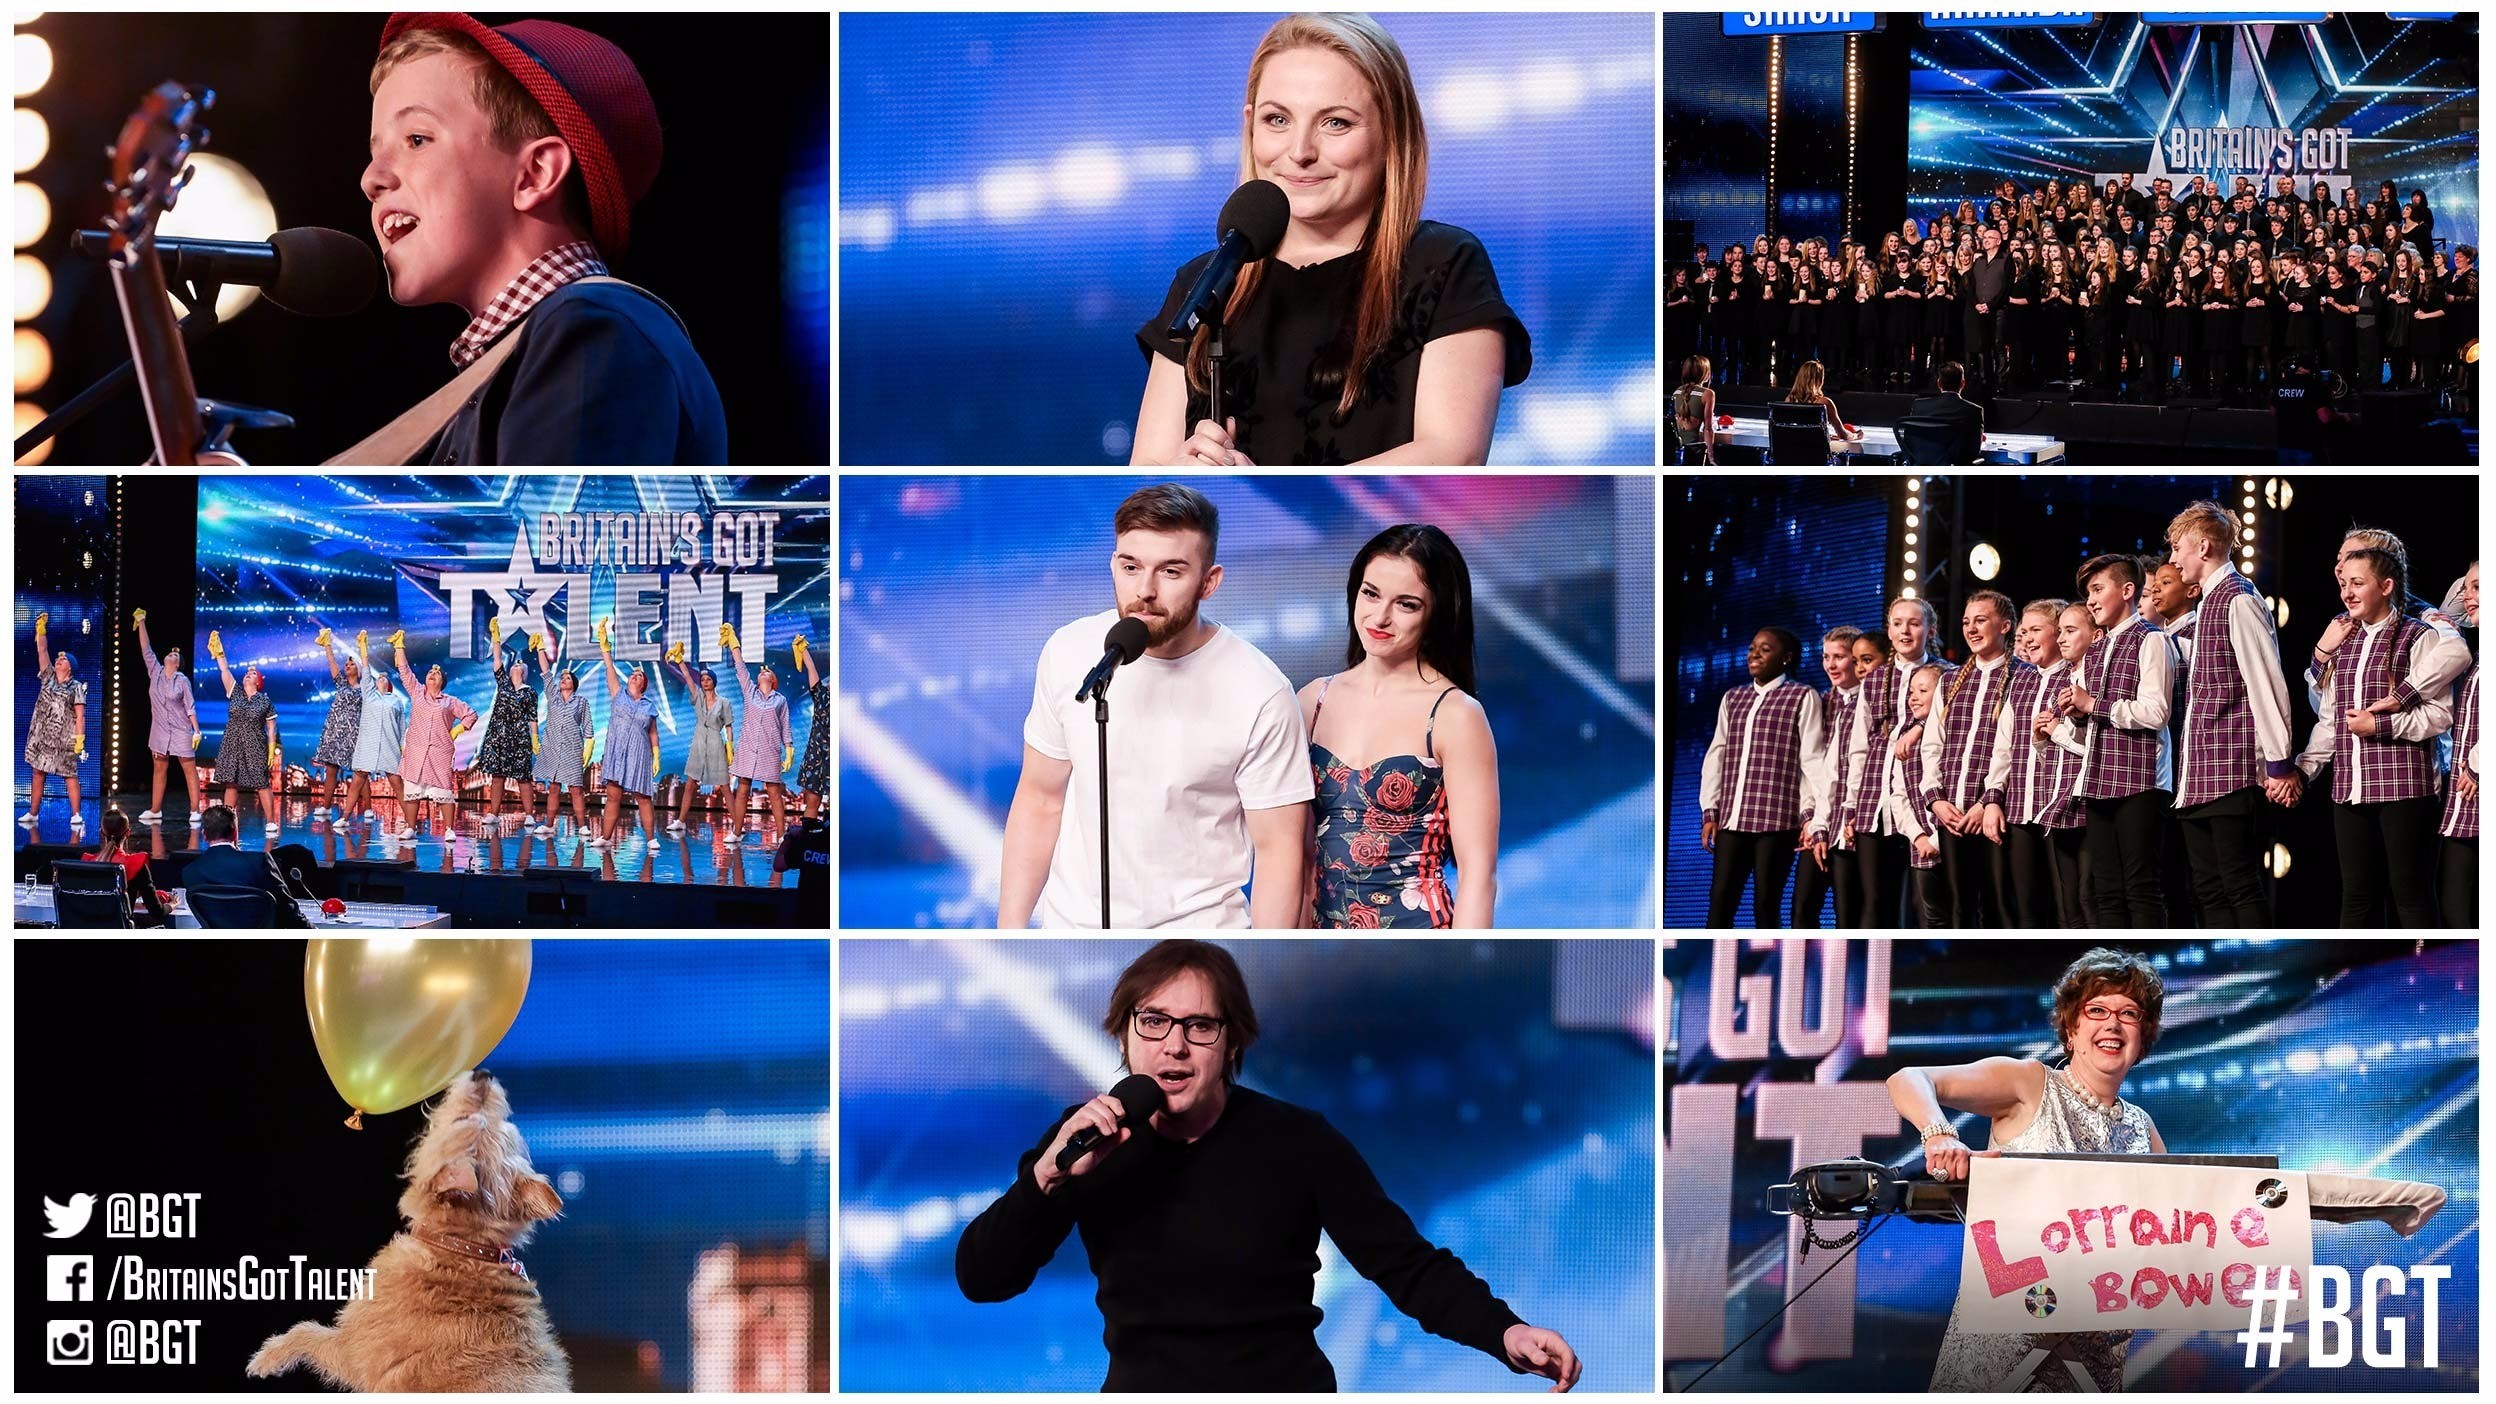 FIRST LOOK! See who's performing in tonight's LIVE SEMIFINAL